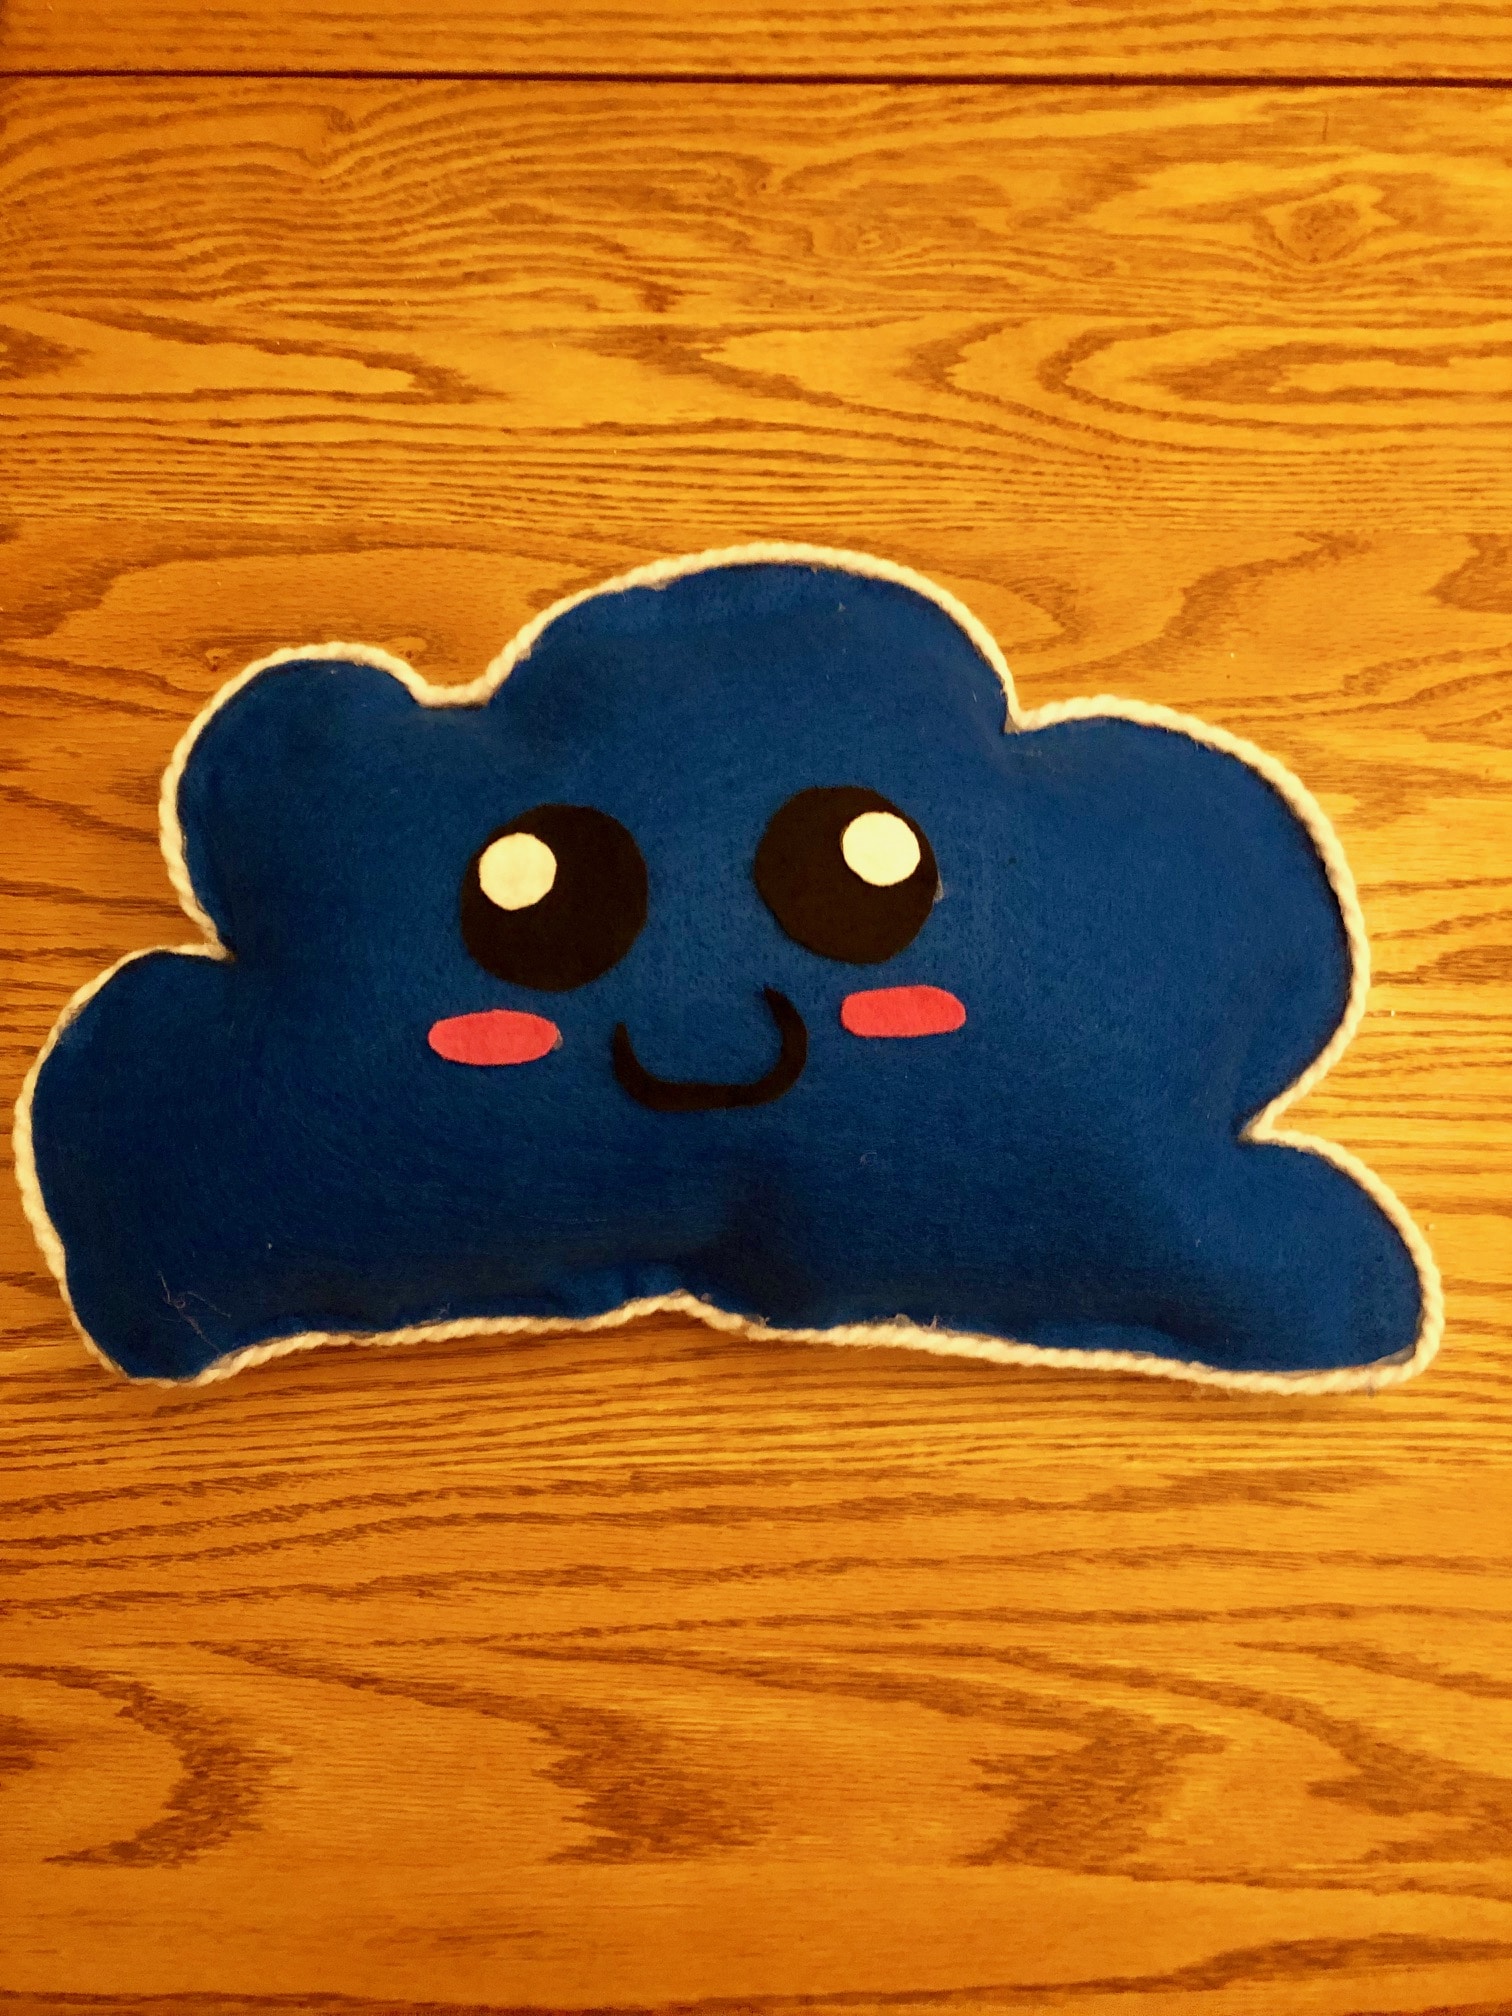 Blue stuffed cloud pillow with white lining and a smiley face and pink cheeks